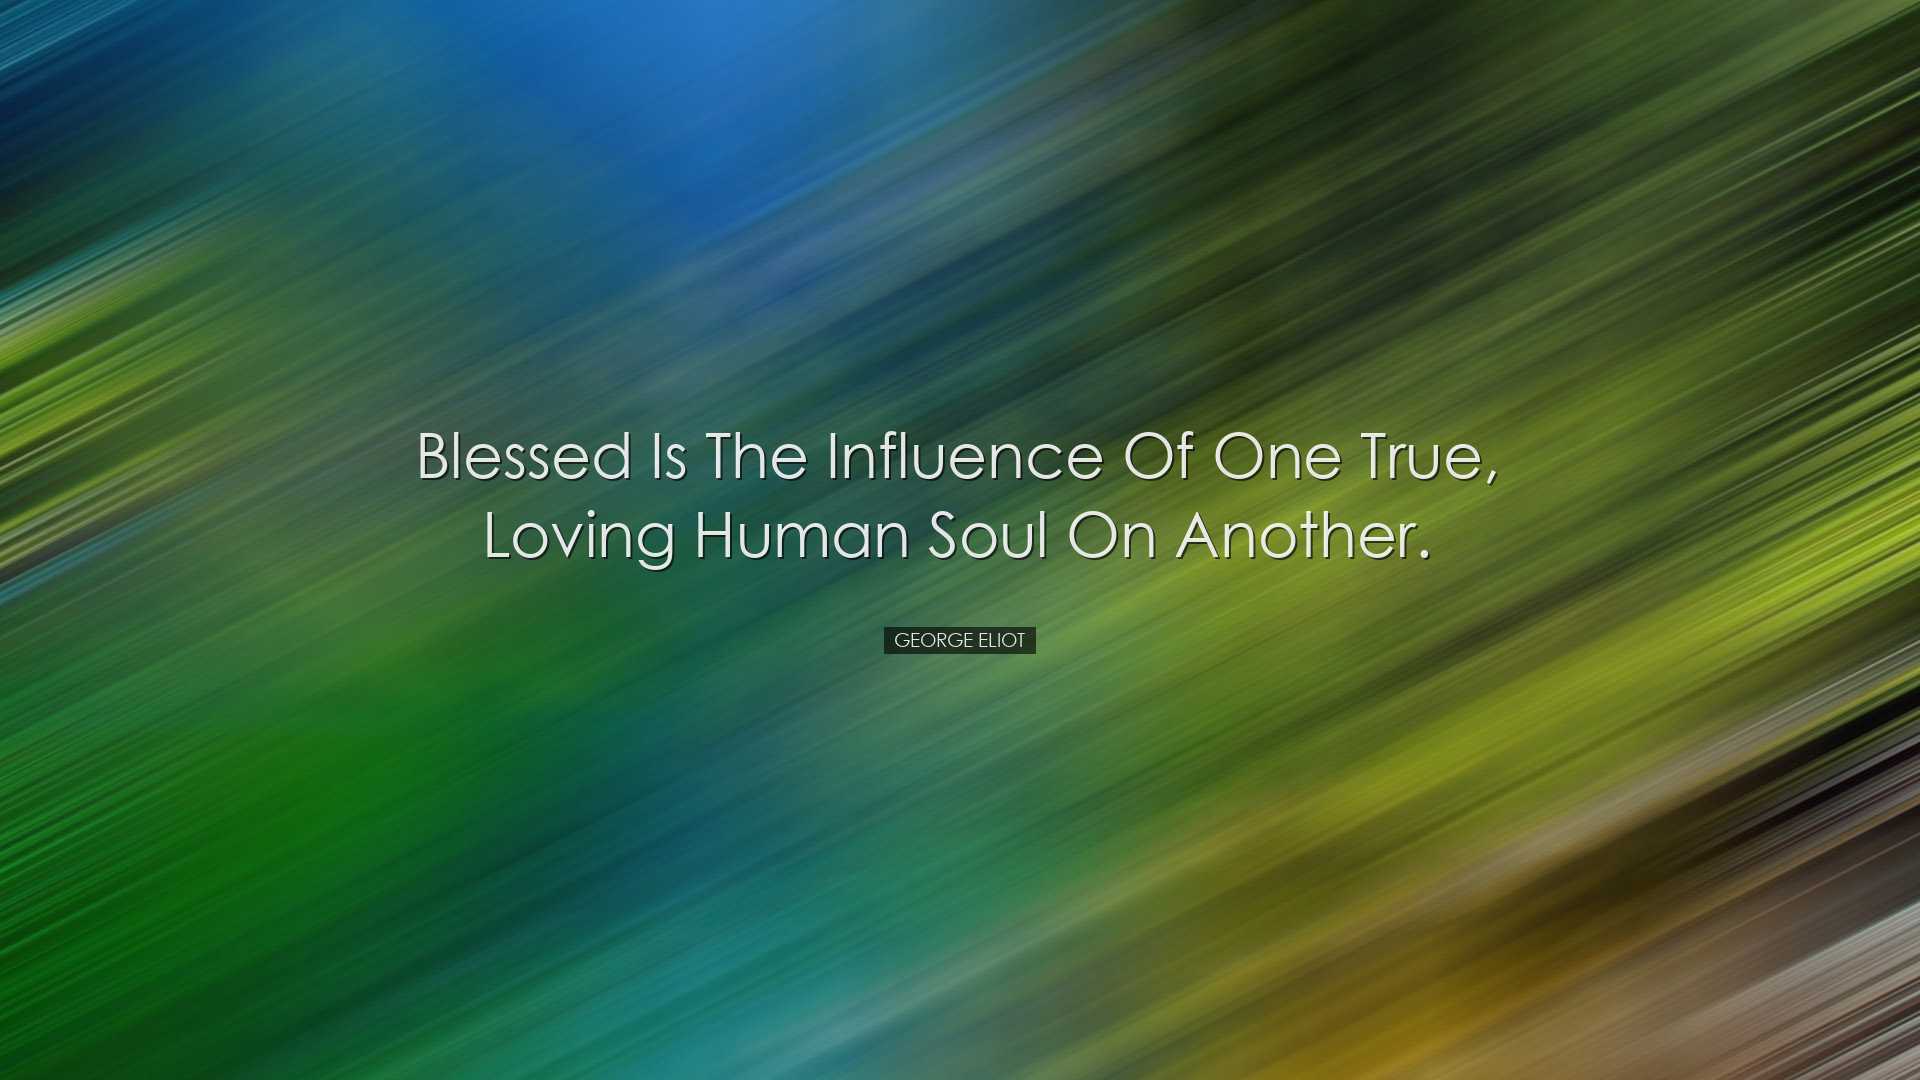 Blessed is the influence of one true, loving human soul on another